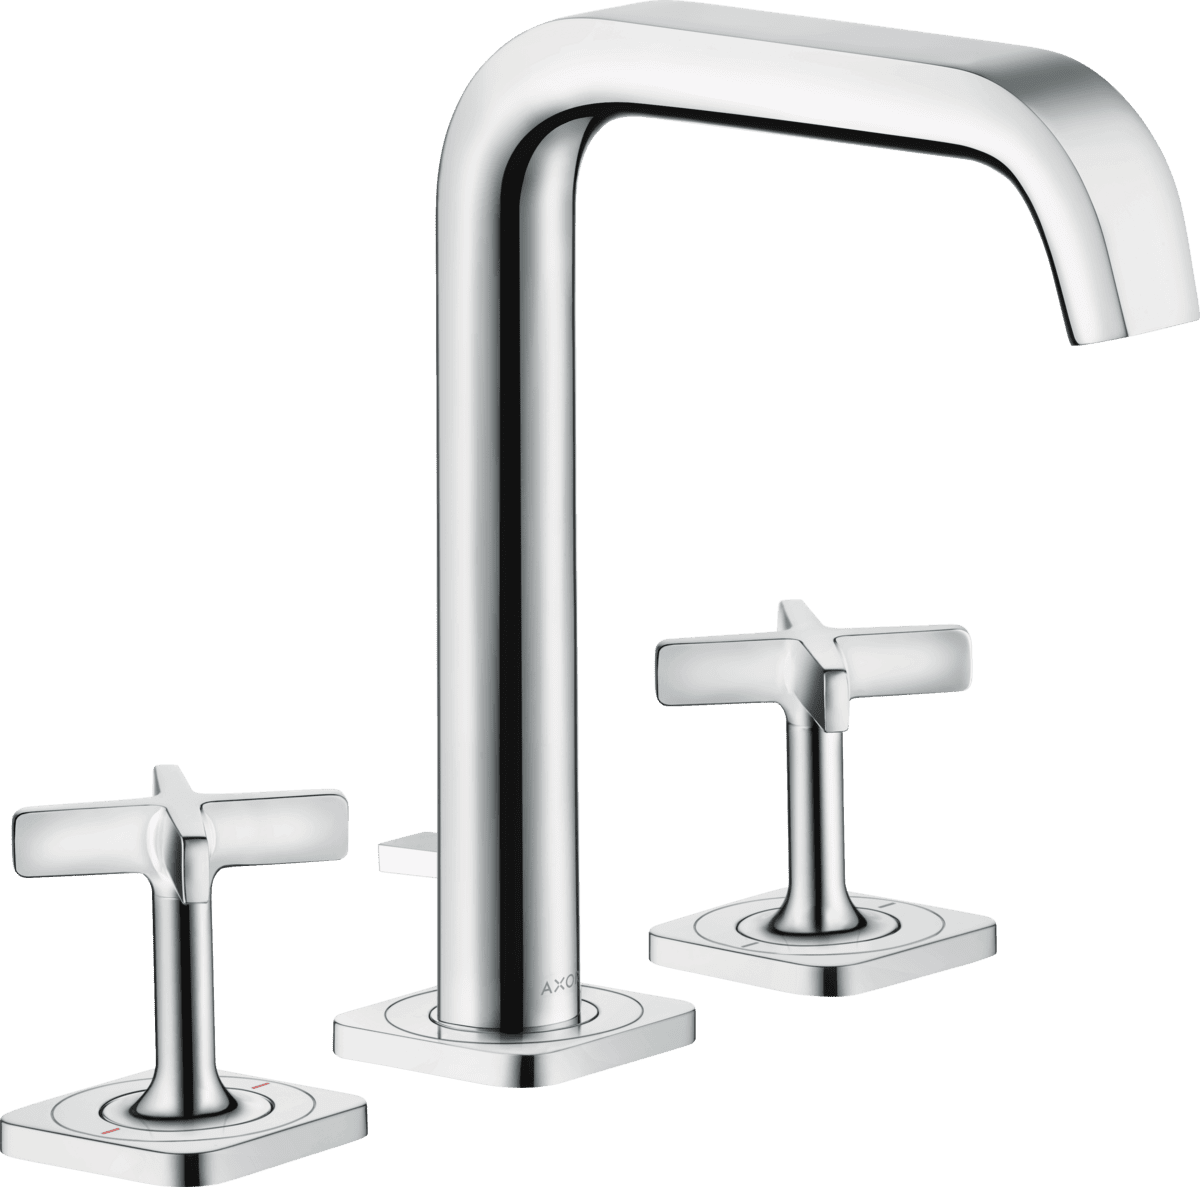 Picture of HANSGROHE AXOR Citterio E 3-hole basin mixer 170 with escutcheons and pop-up waste set #36108000 - Chrome